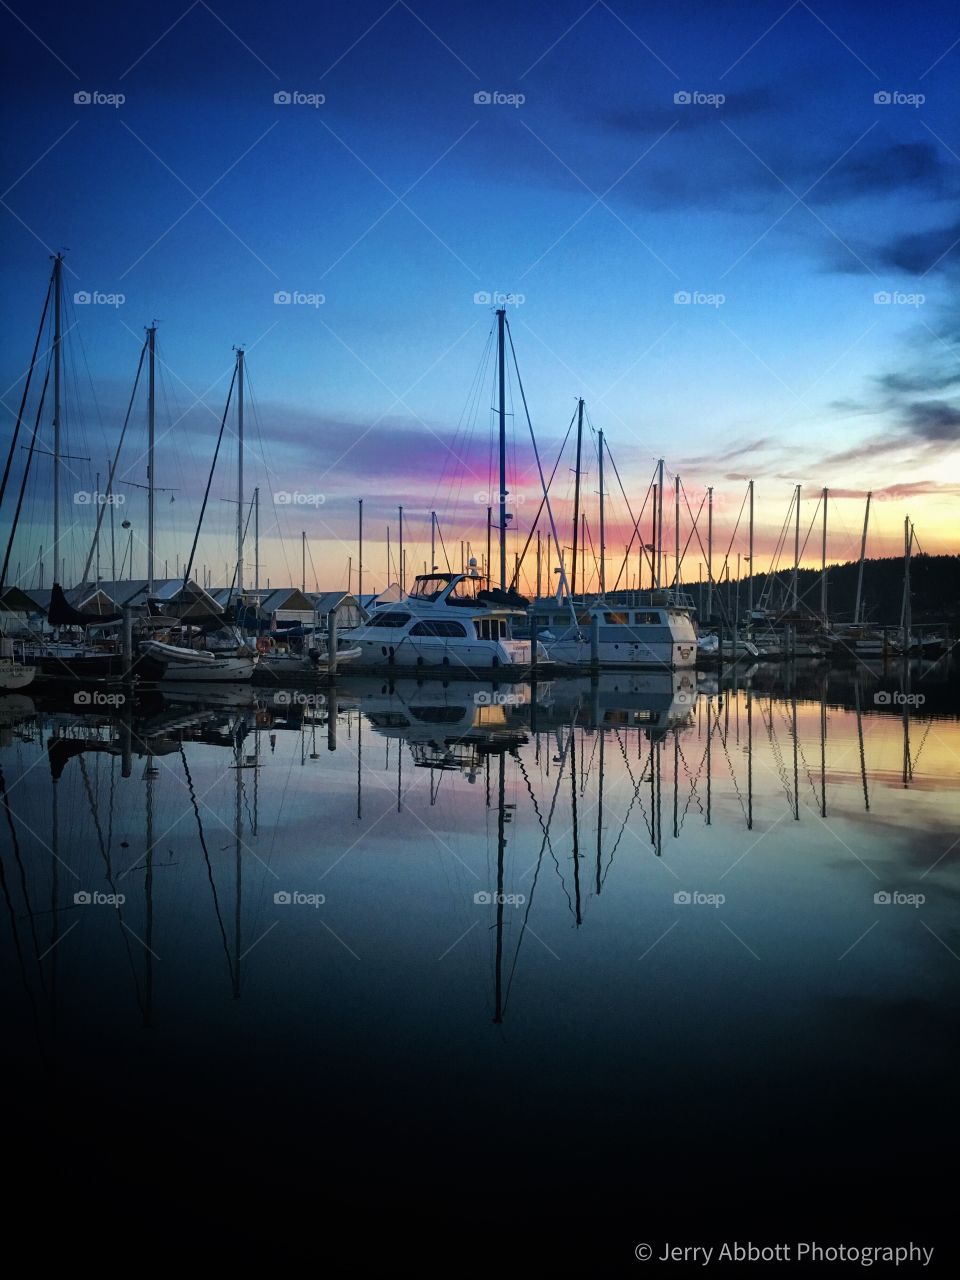 Pink & Blue Sky Reflection with Sailboats